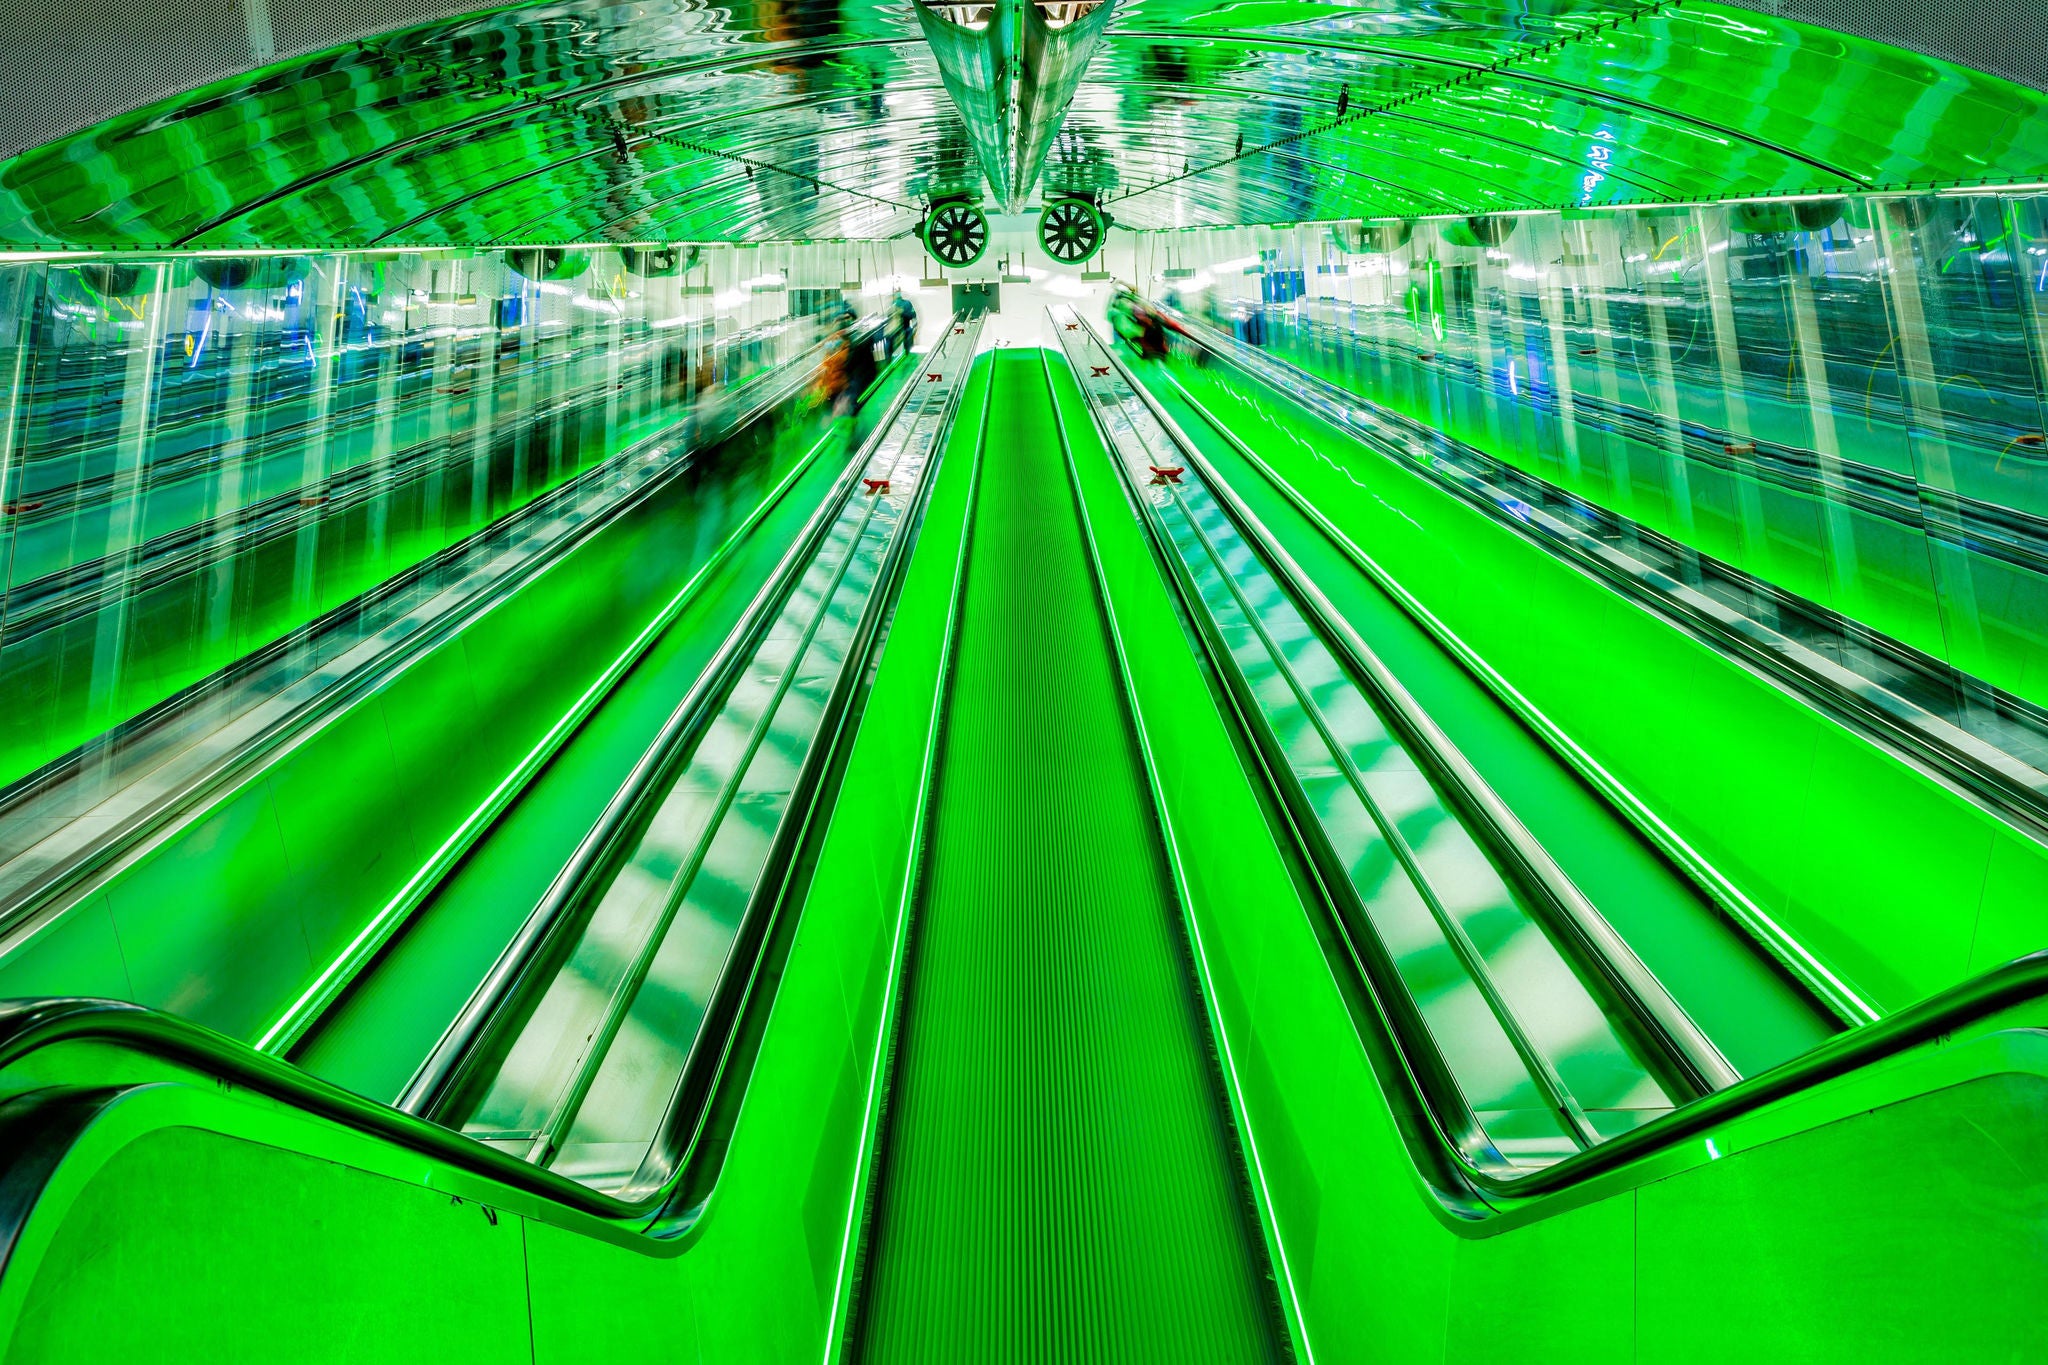 This image shows long exposure Blurred motion of moving walkway. The image is taken in helsinki finland.